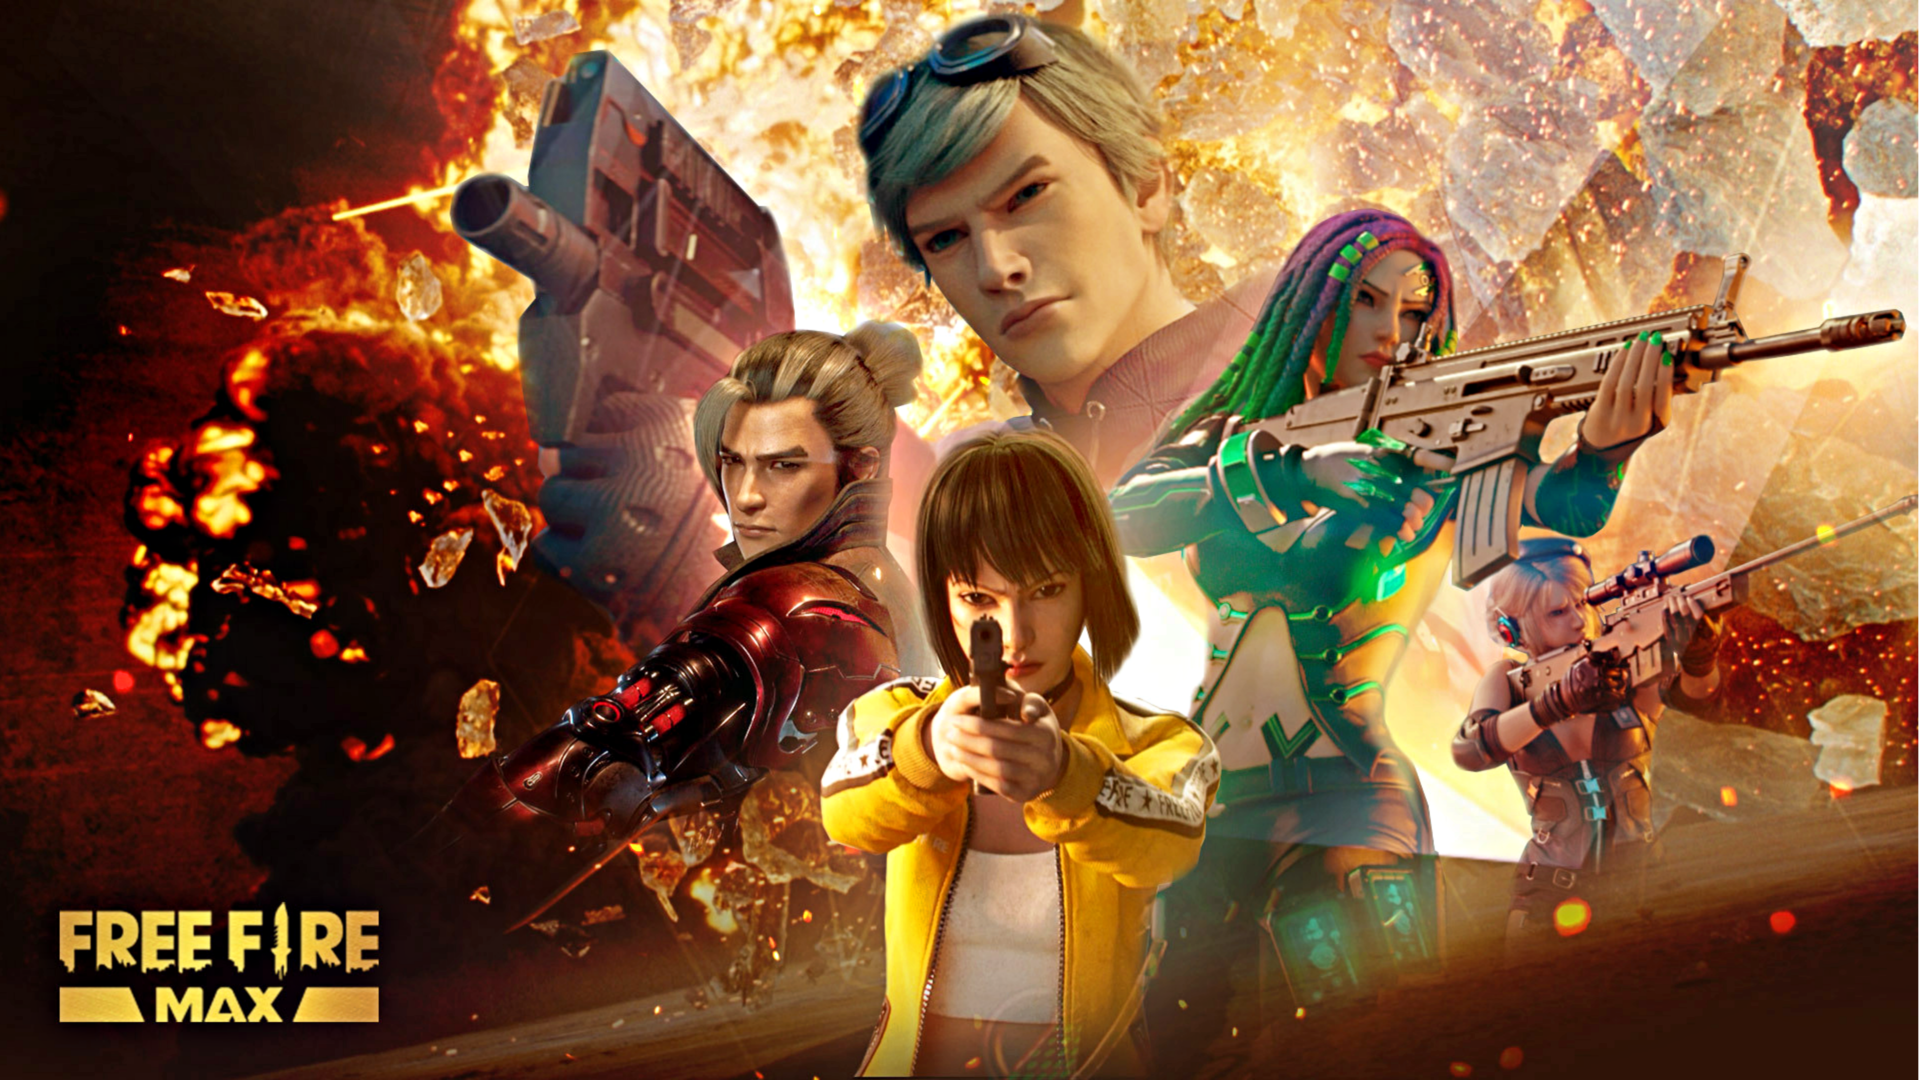 Free Fire MAX codes for February 7: How to redeem